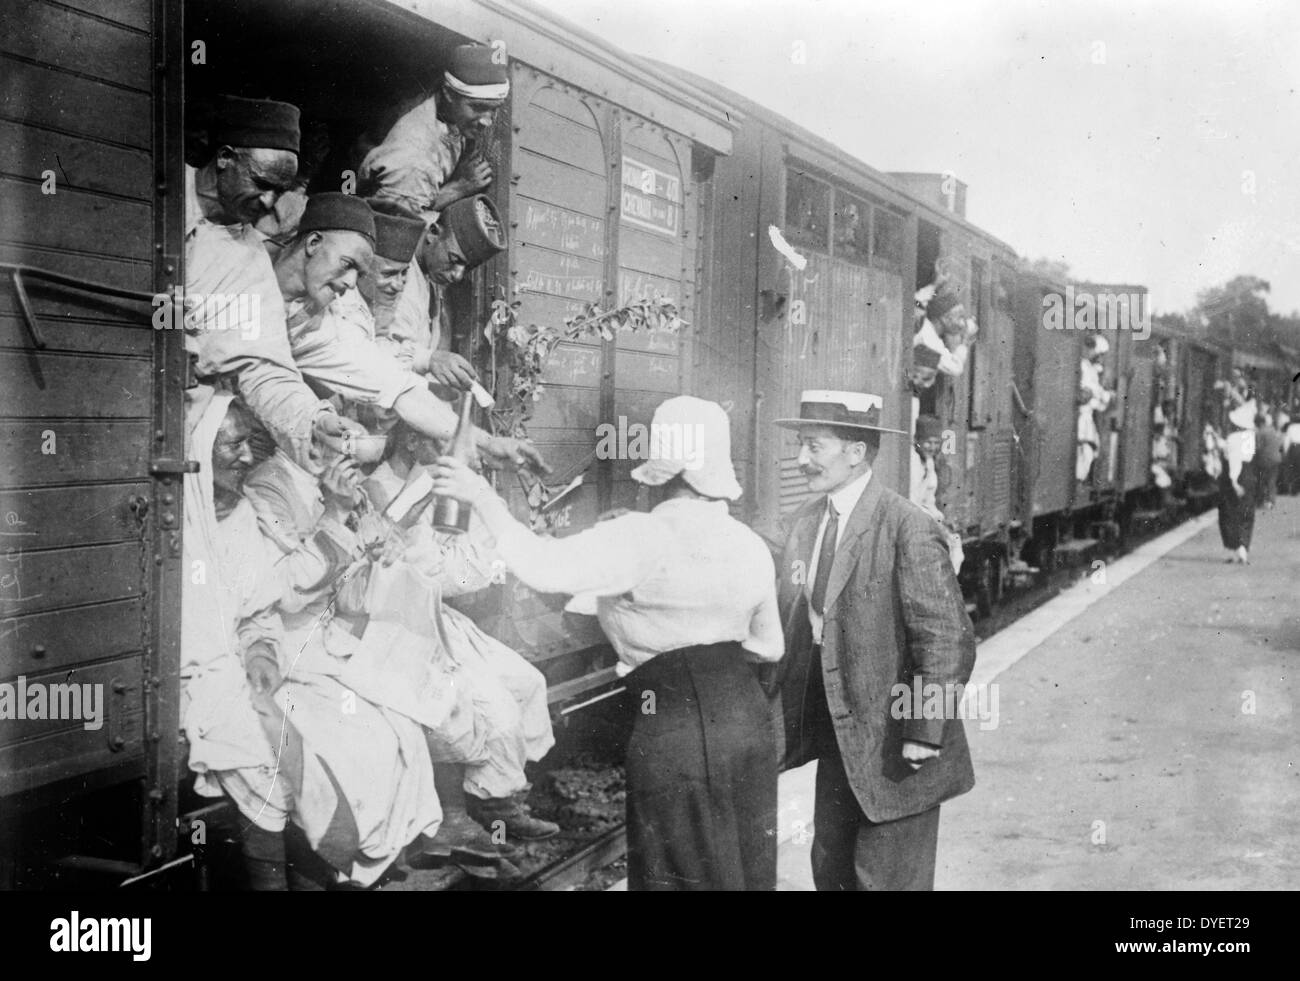 Photograph shows people giving wine to Algerian soldiers at Champigny-sur-Marne, France, during World War I. Stock Photo